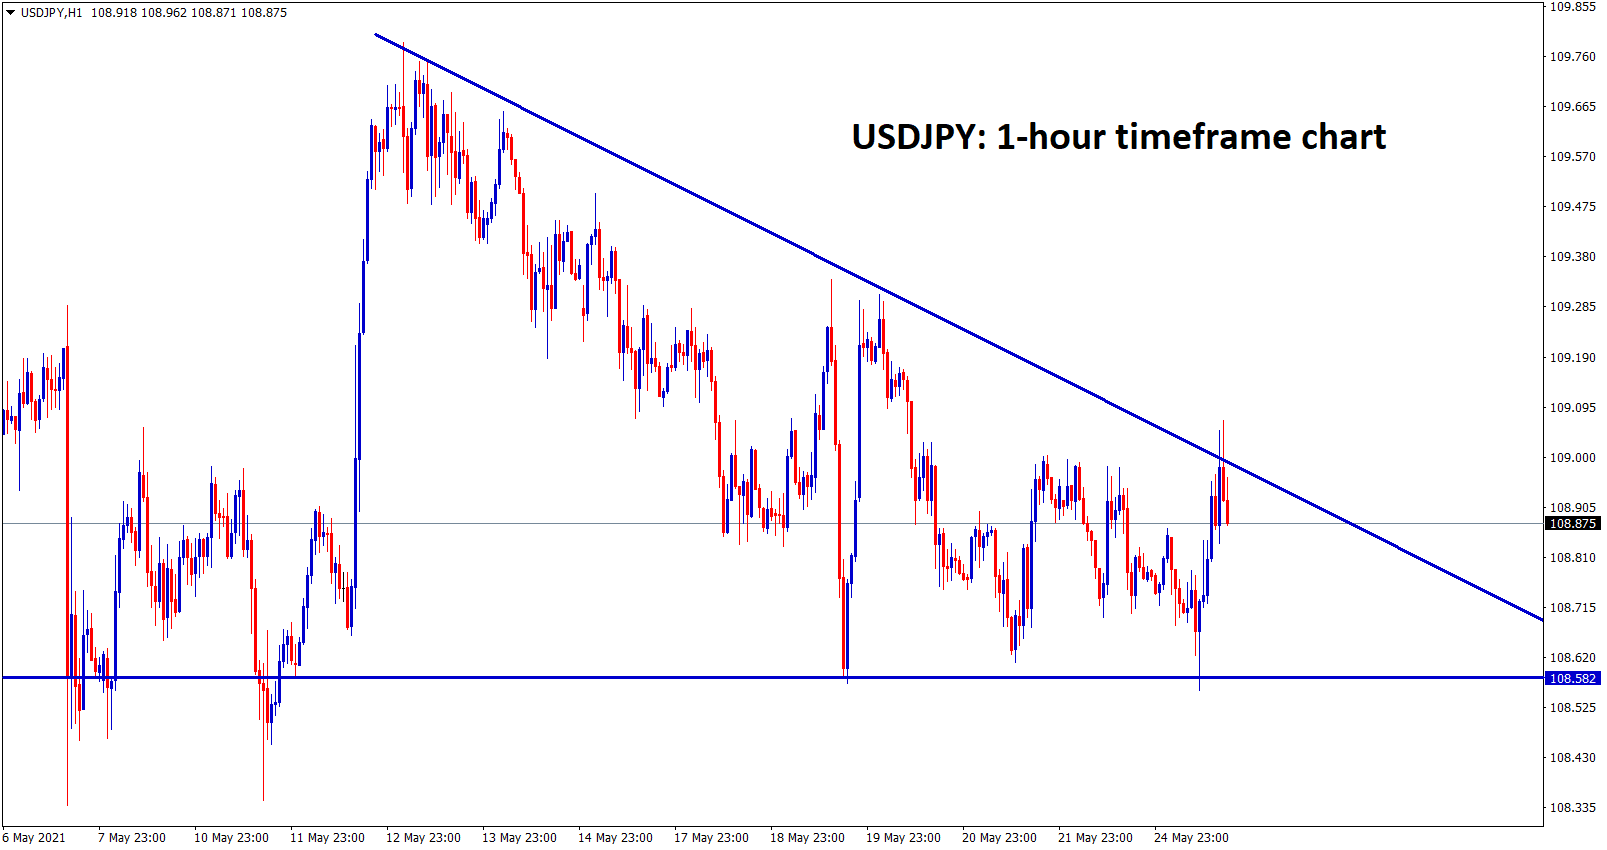 USDJPY is moving in a descending triangle pattern forming lower highs and equal lows